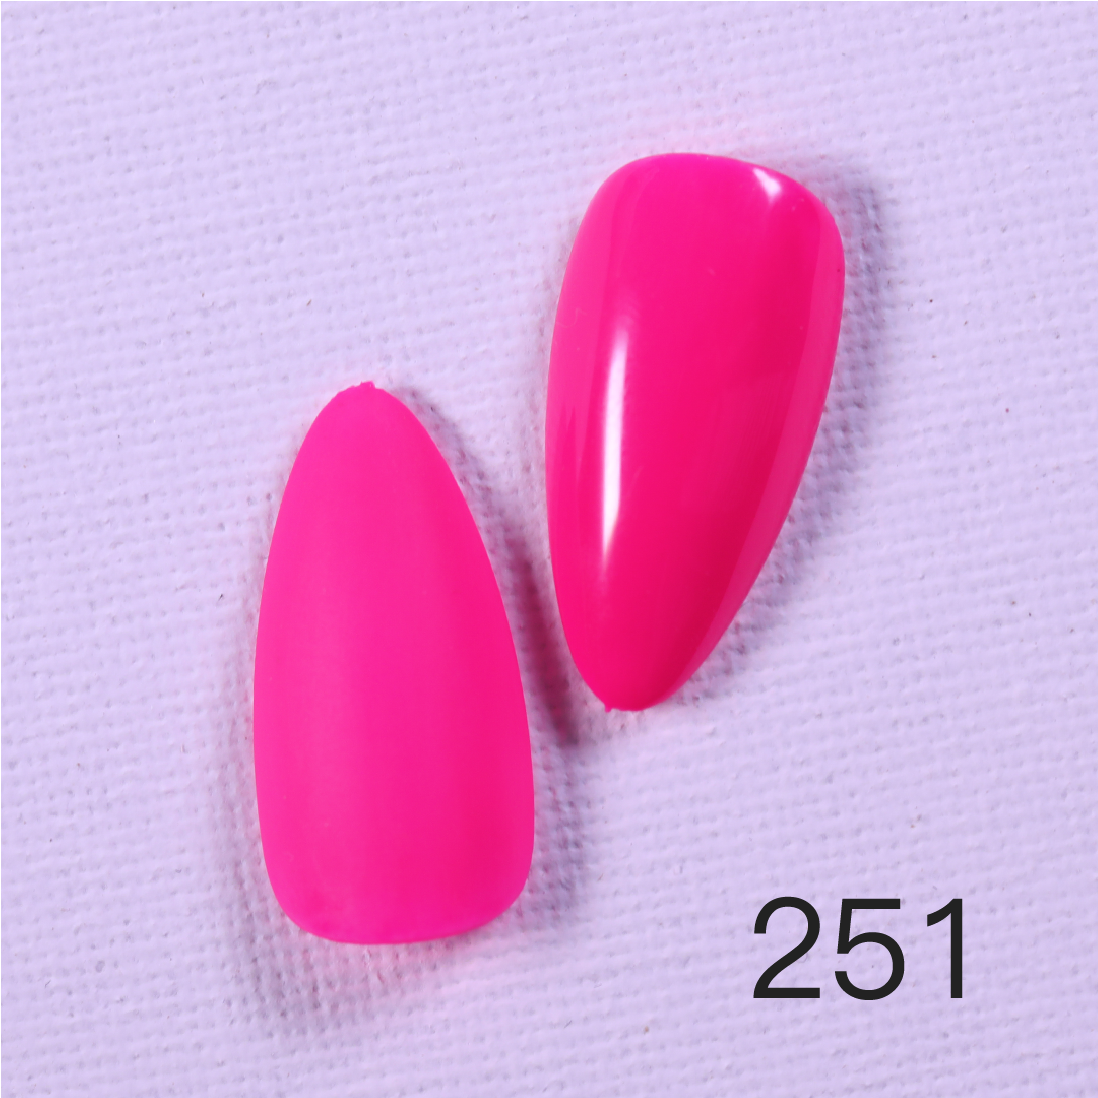 {{ GelPolish_USA }} GelPolish USA 251 GelPolish USA Mela Mela Gel Polish Colour - 80 colors available to choose from - {{ UV_Drying_machine}} - {{ Powerful_LED_Nail_Dryer}} {{ Gelish }} {{Gel_nail_polish}} {{ Gel_polish }}